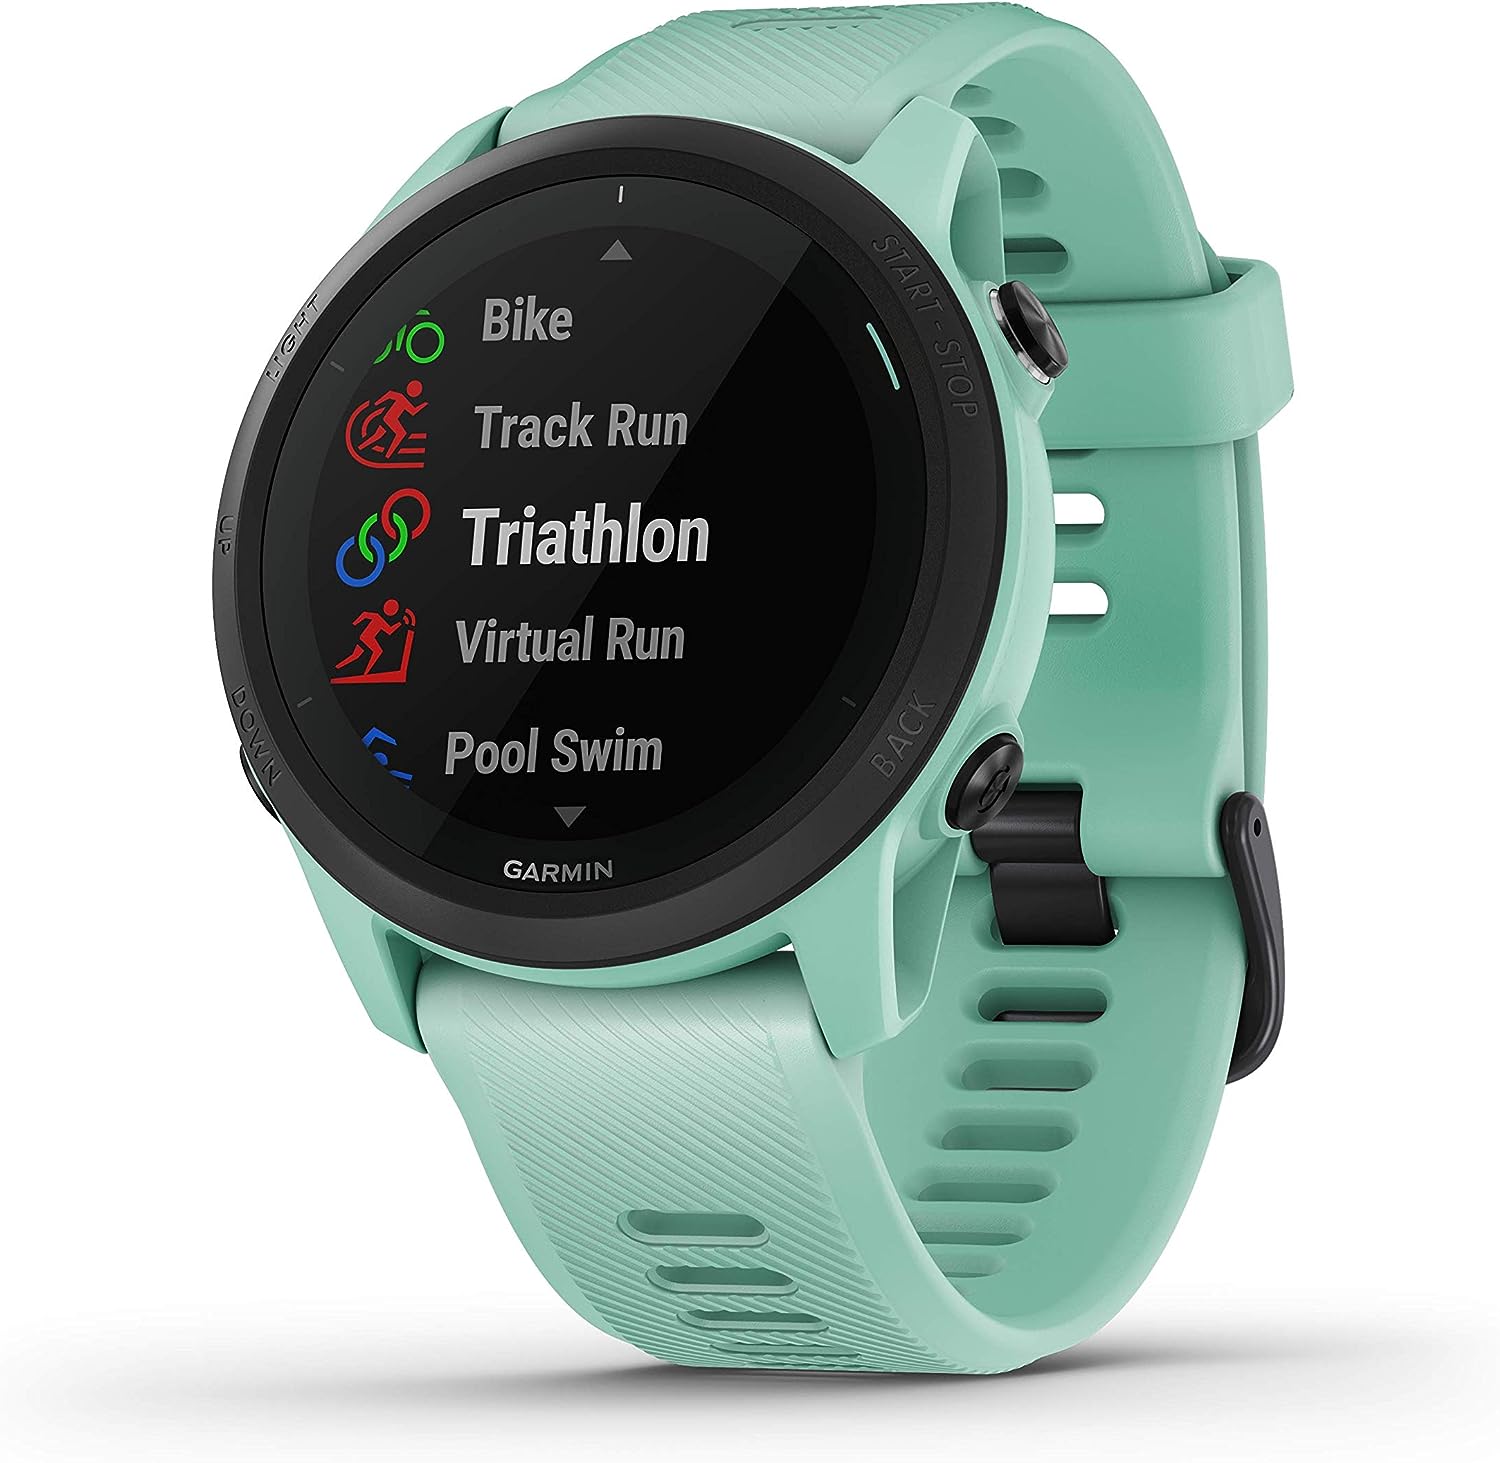 Snatch the Garmin Forerunner 745 in Tropic to save an epic 37% ahead of Black Friday